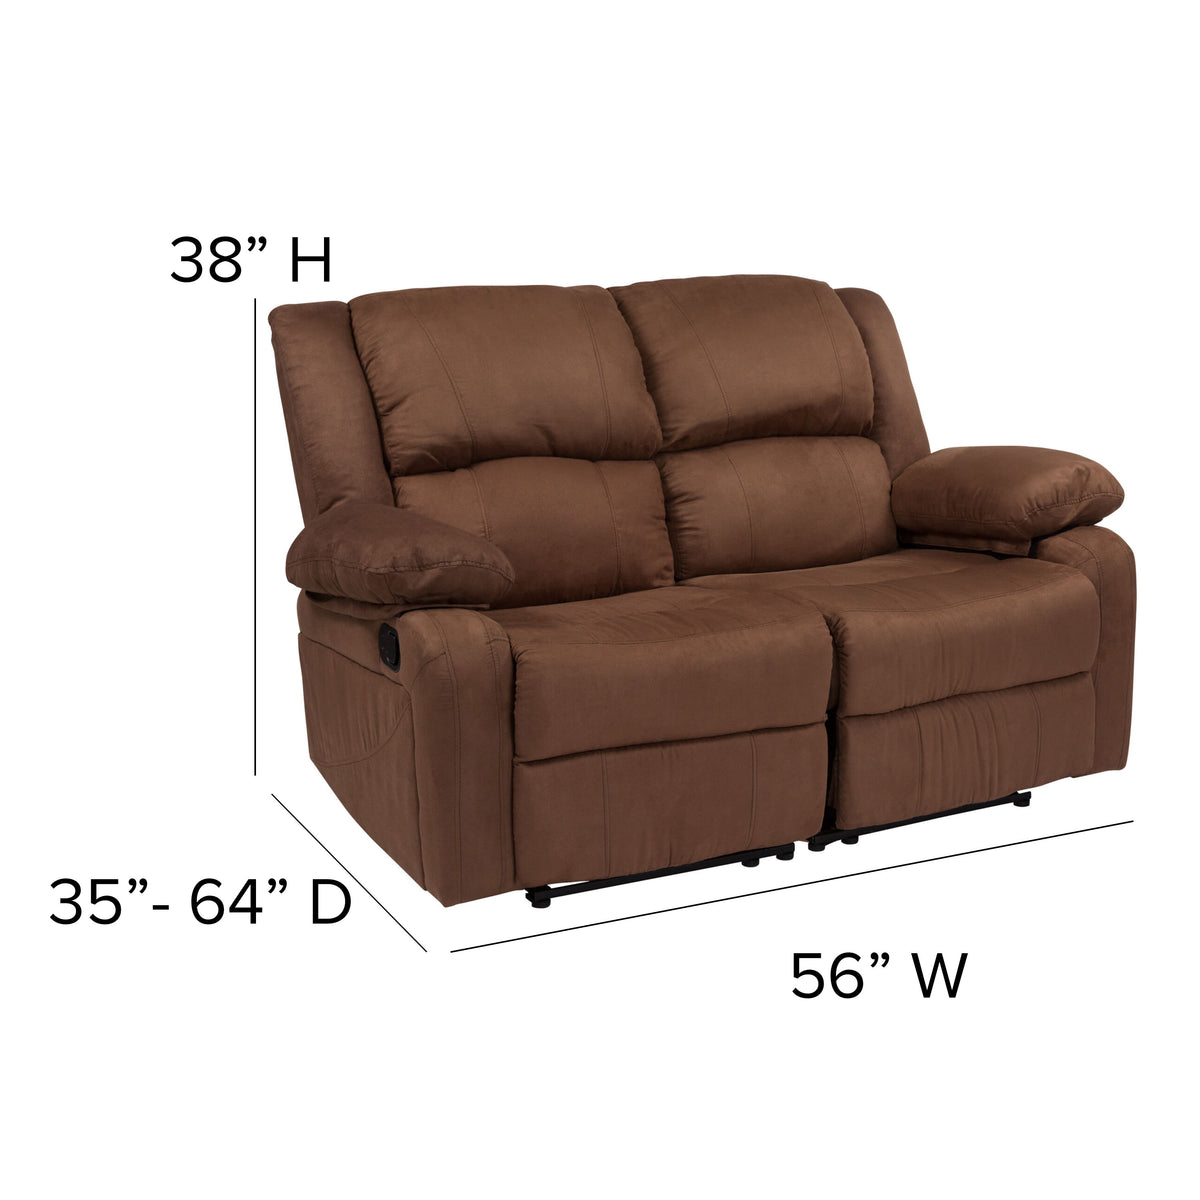 Chocolate Brown Microfiber |#| Chocolate Brown Microfiber Pillow Back Loveseat with Two Built-In Recliners